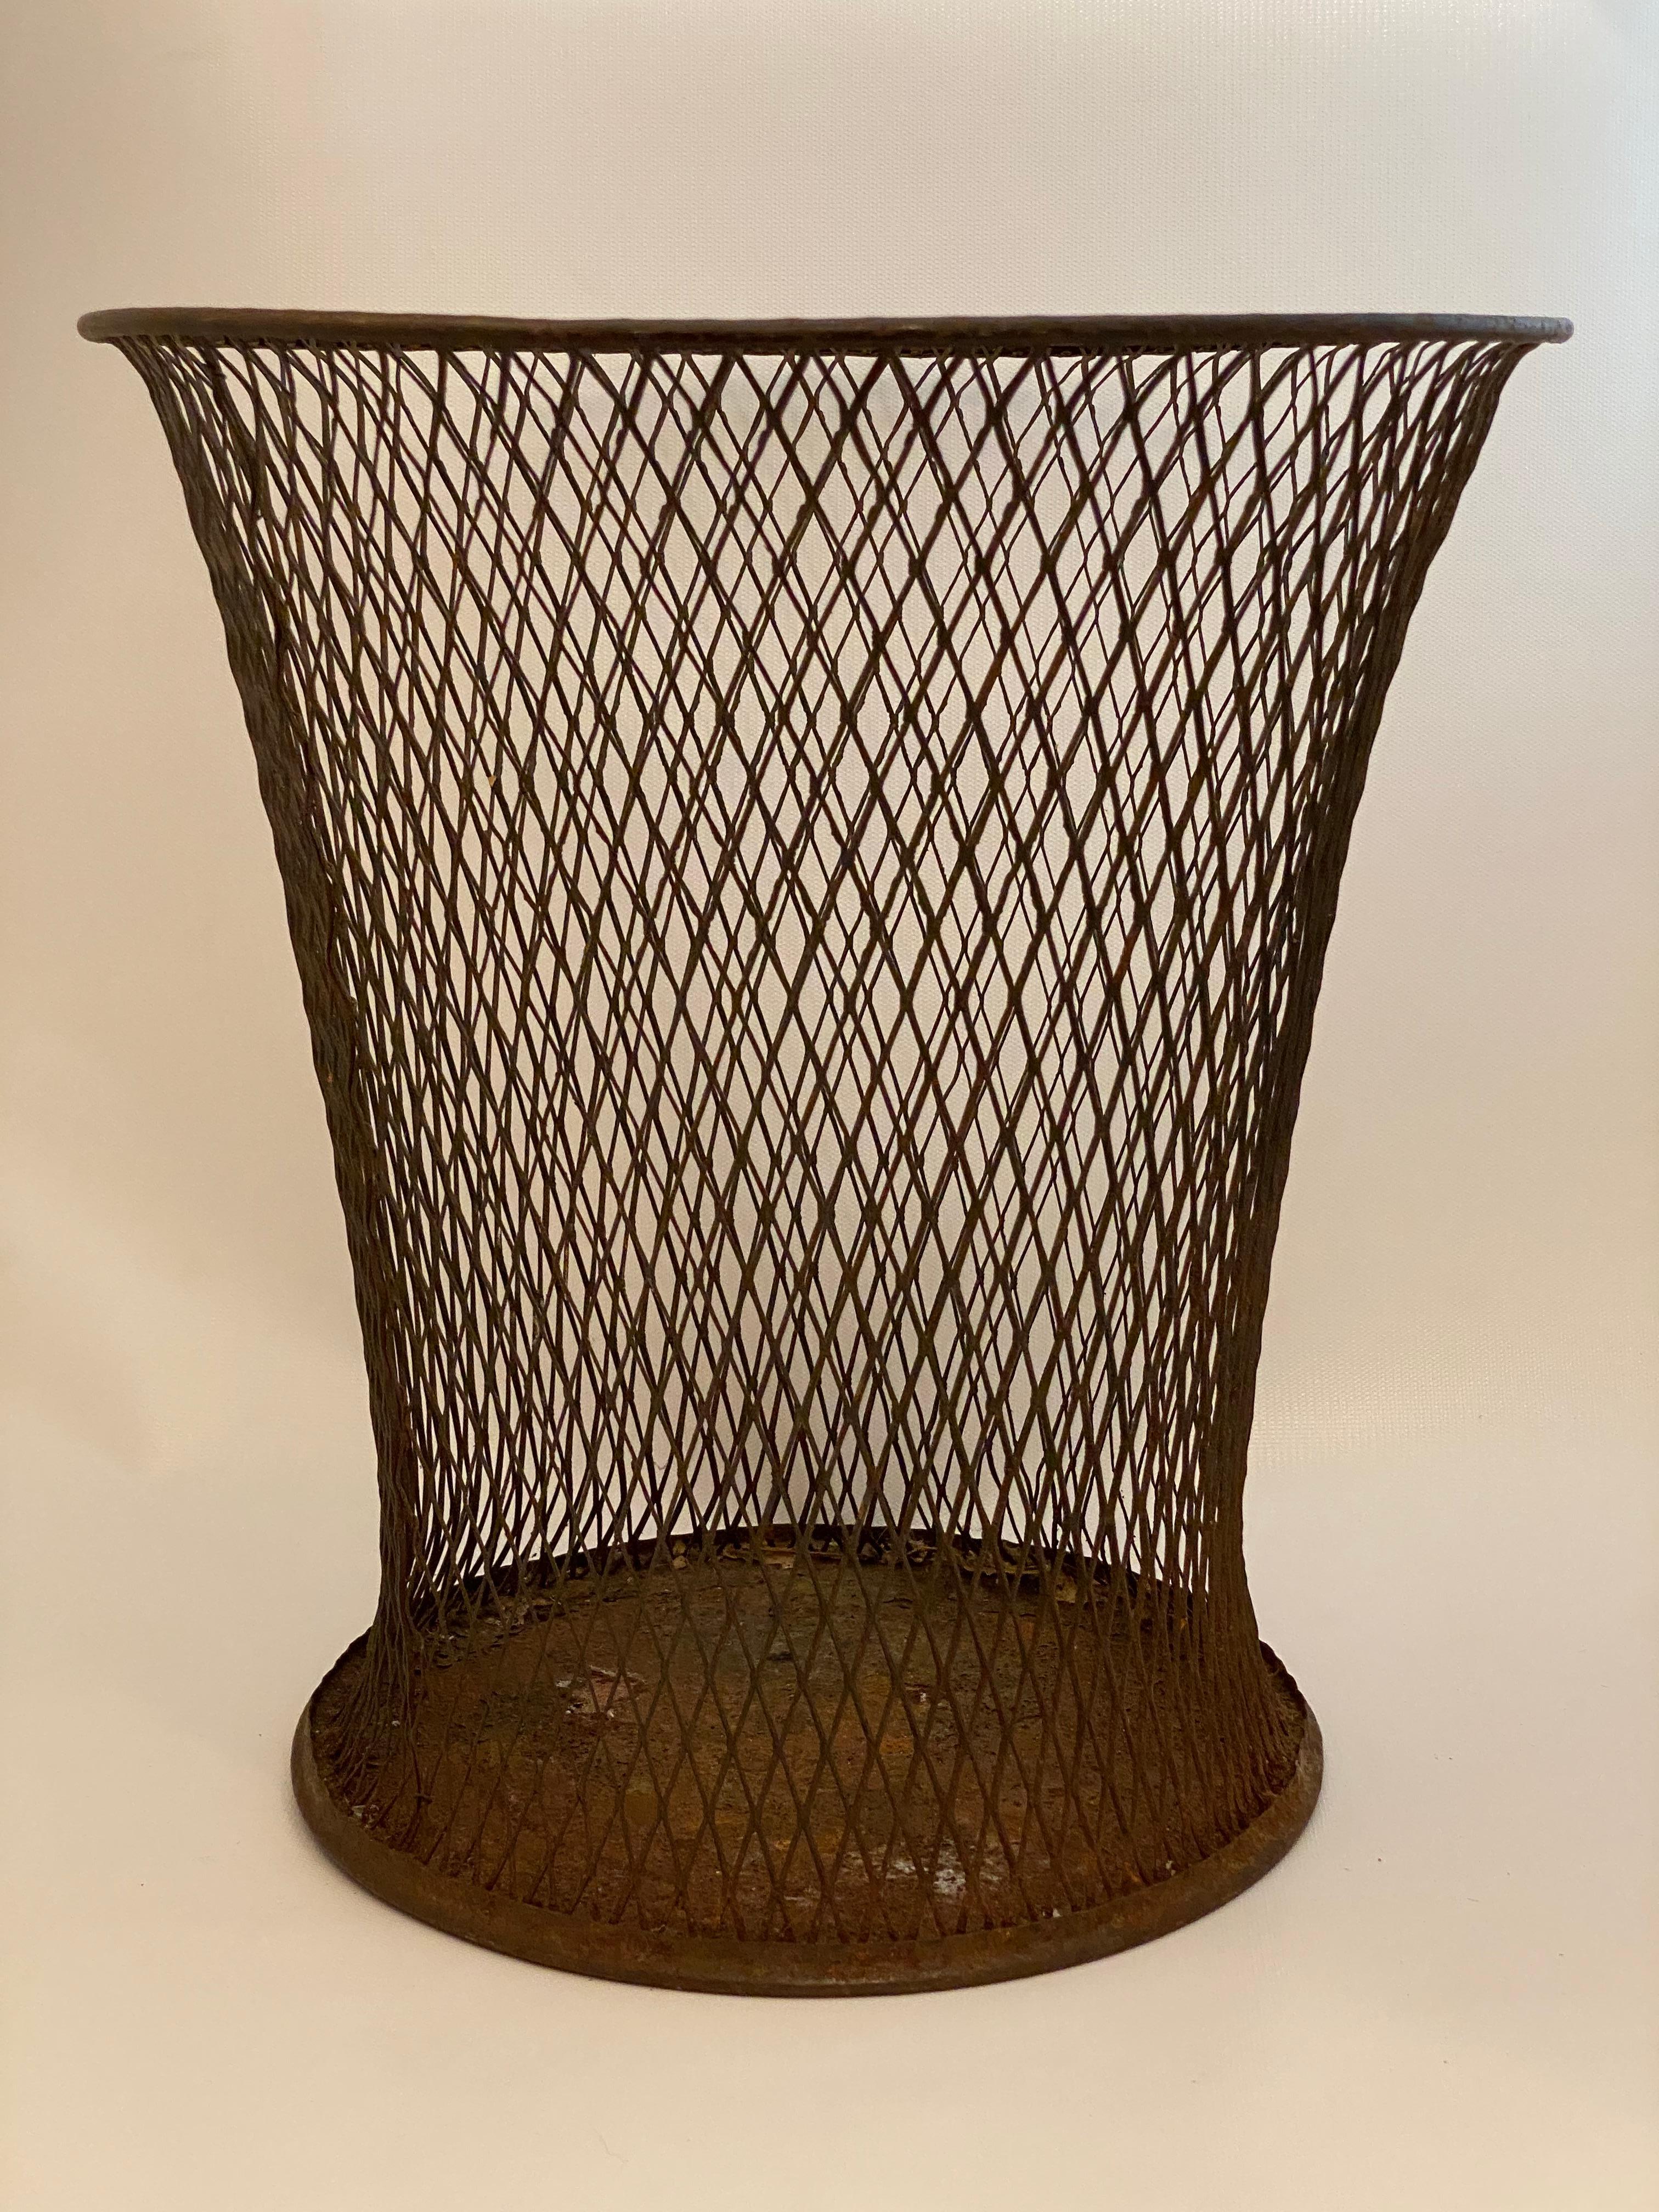 The Northwestern Expanded Metal Company, Chicago wire mesh waste basket. Fantastic diamond mesh pattern with an elegantly flared lines. Fully stamped signature on the underside. Circa 1920-30. Good overall condition with some rusting and pitting.